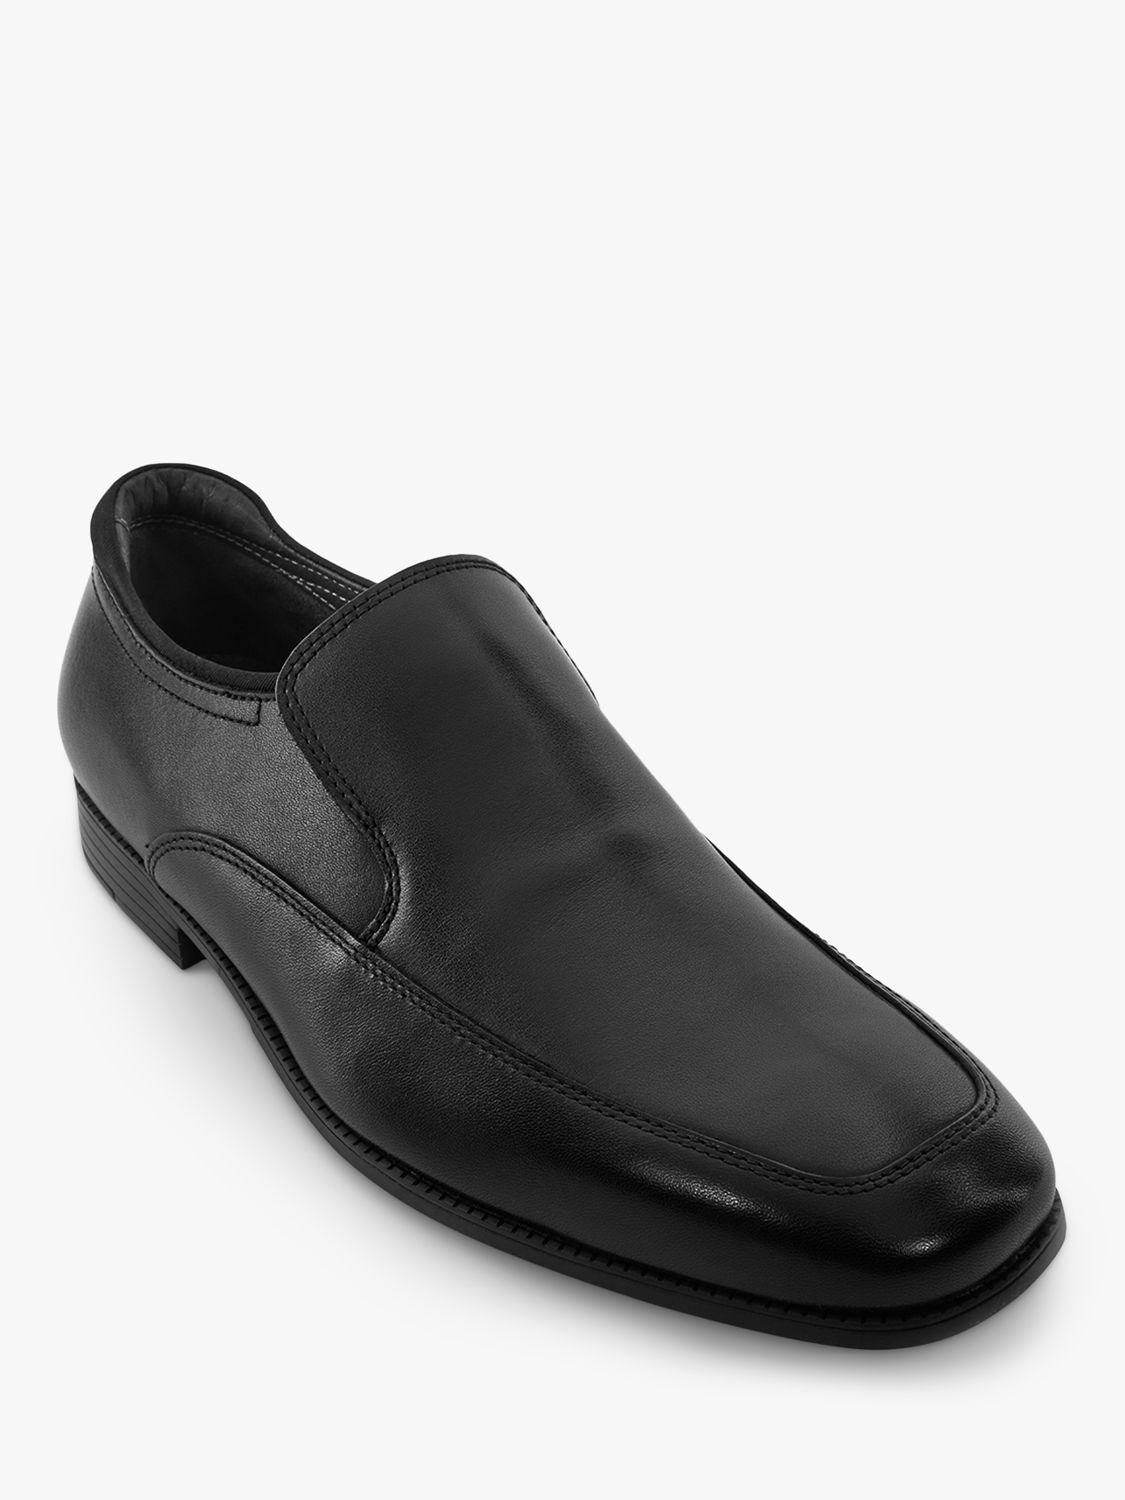 Buy Start Rite Kids' College Leather Slip-On School Shoes Online at johnlewis.com